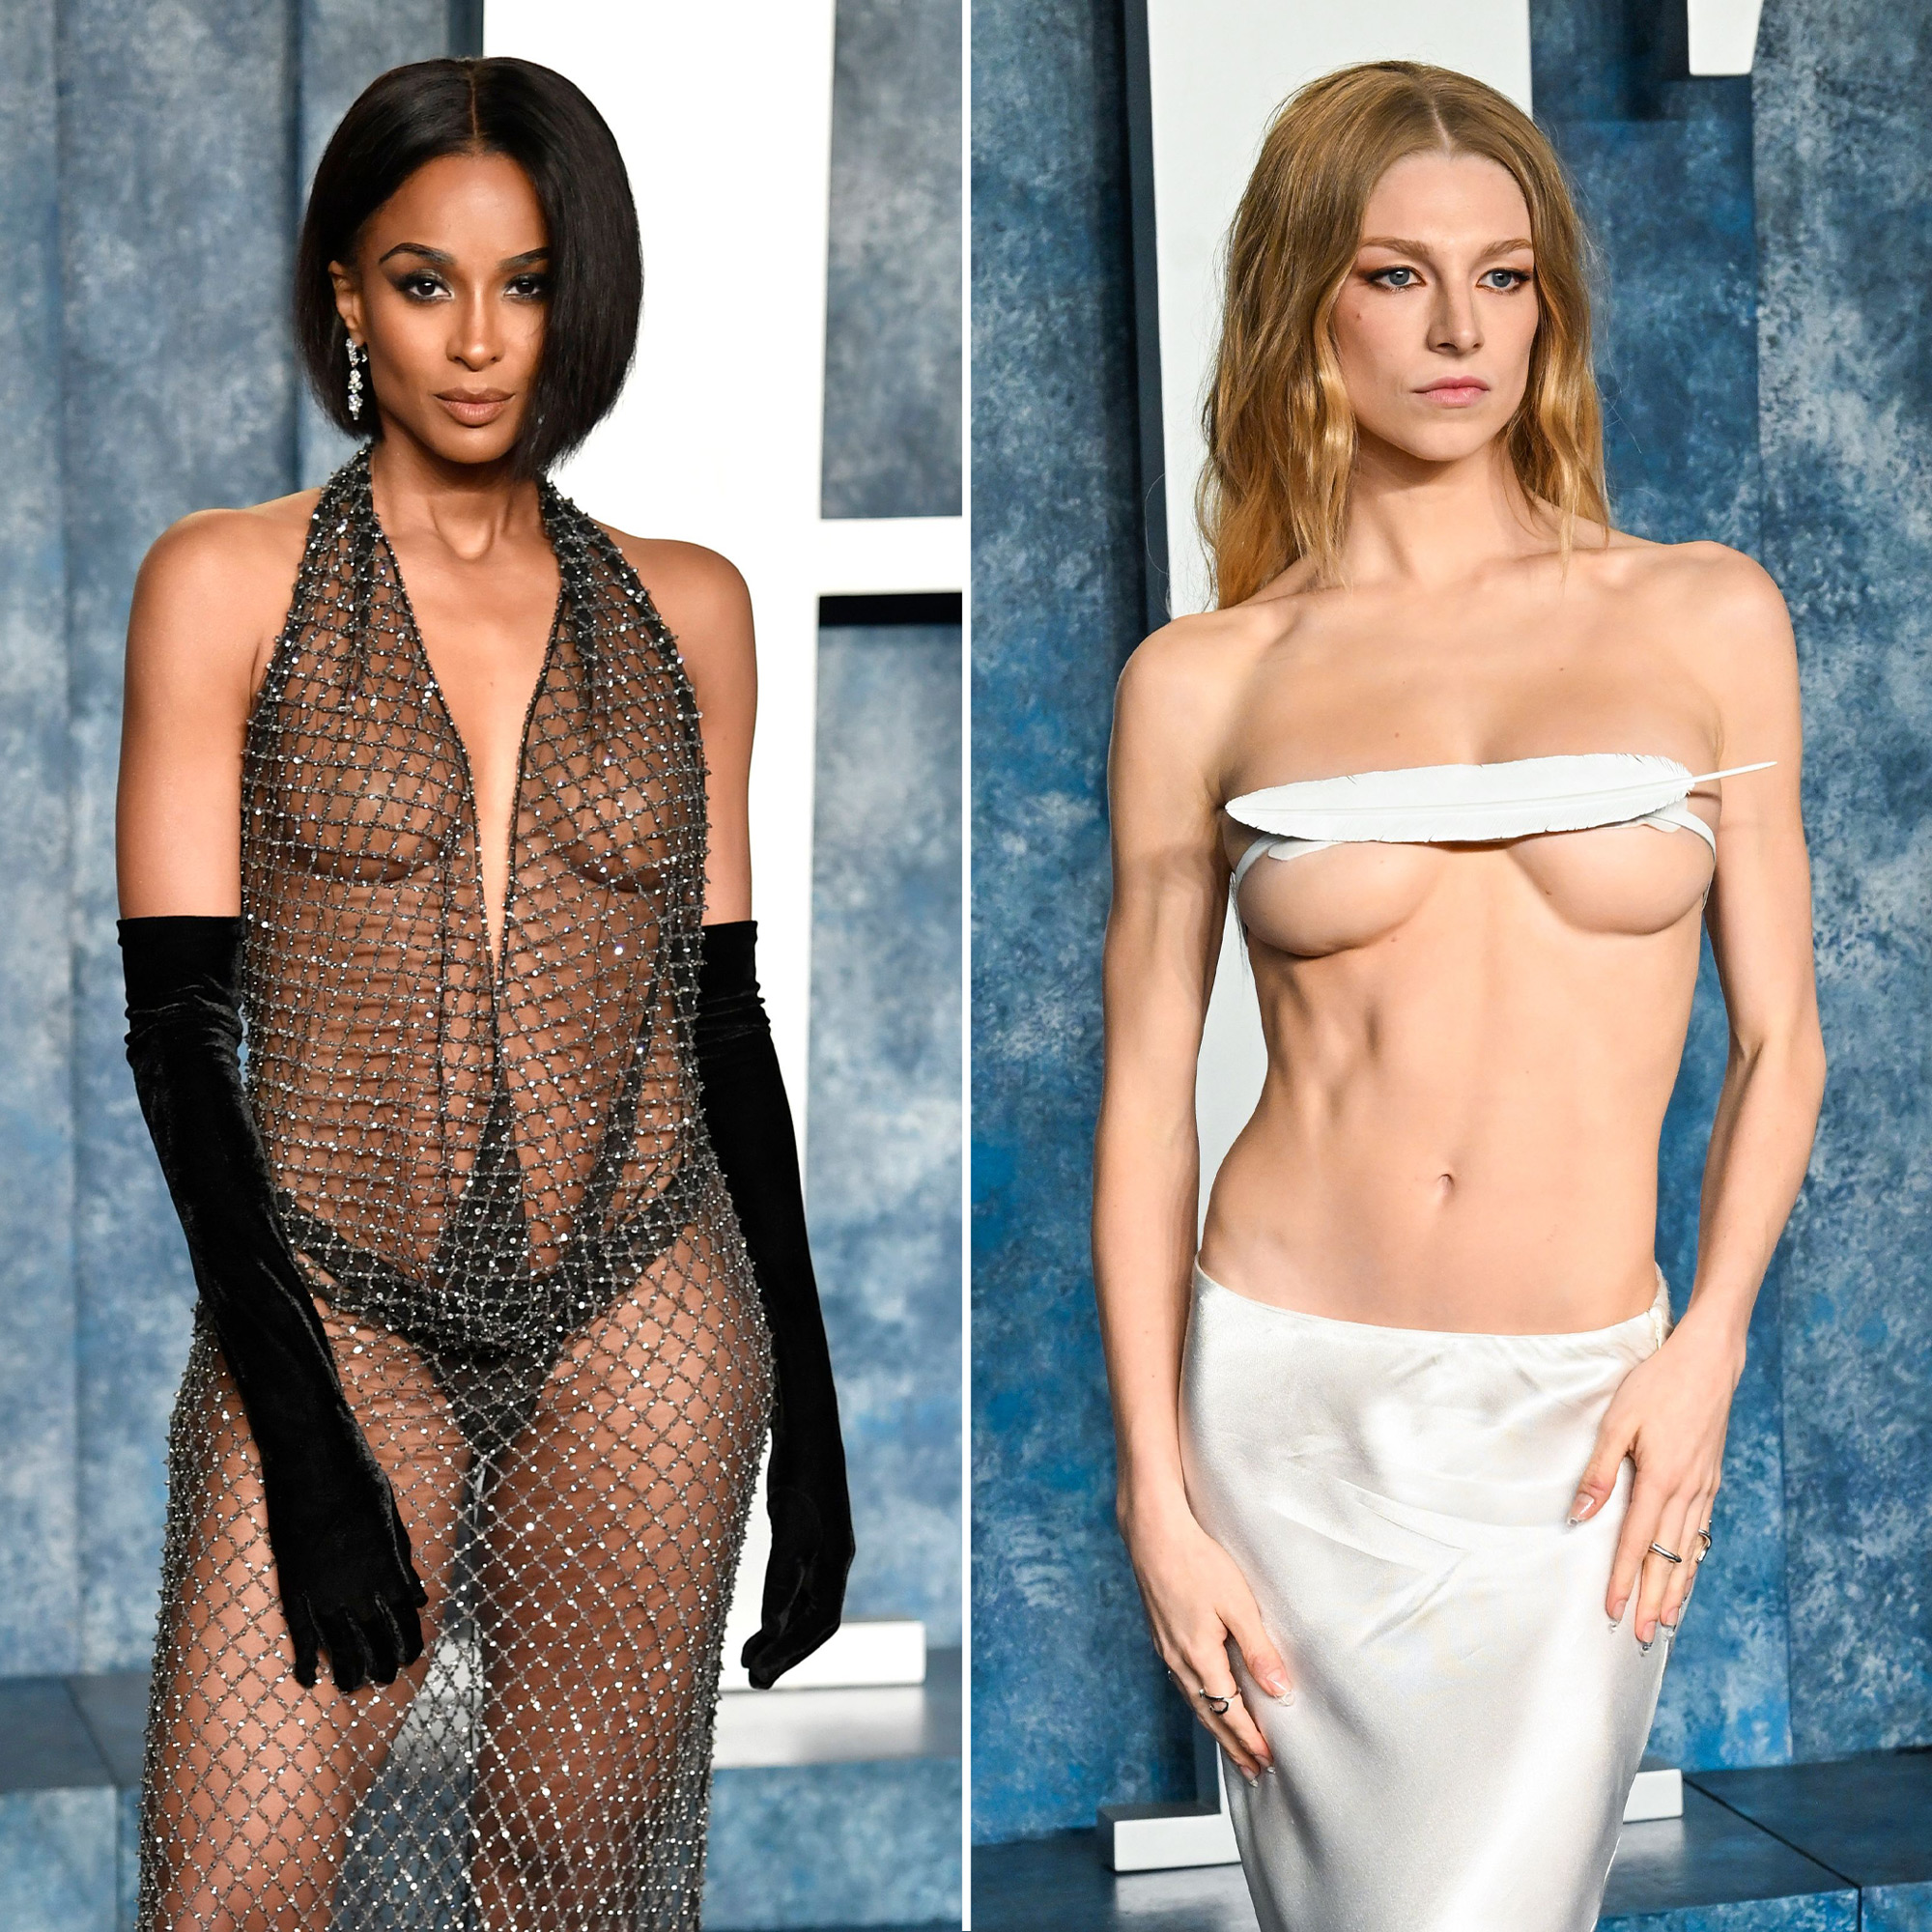 You Yube Vintage Celebrity Nudes - Celebs Boldest Nearly Naked Red Carpet Looks of All Time